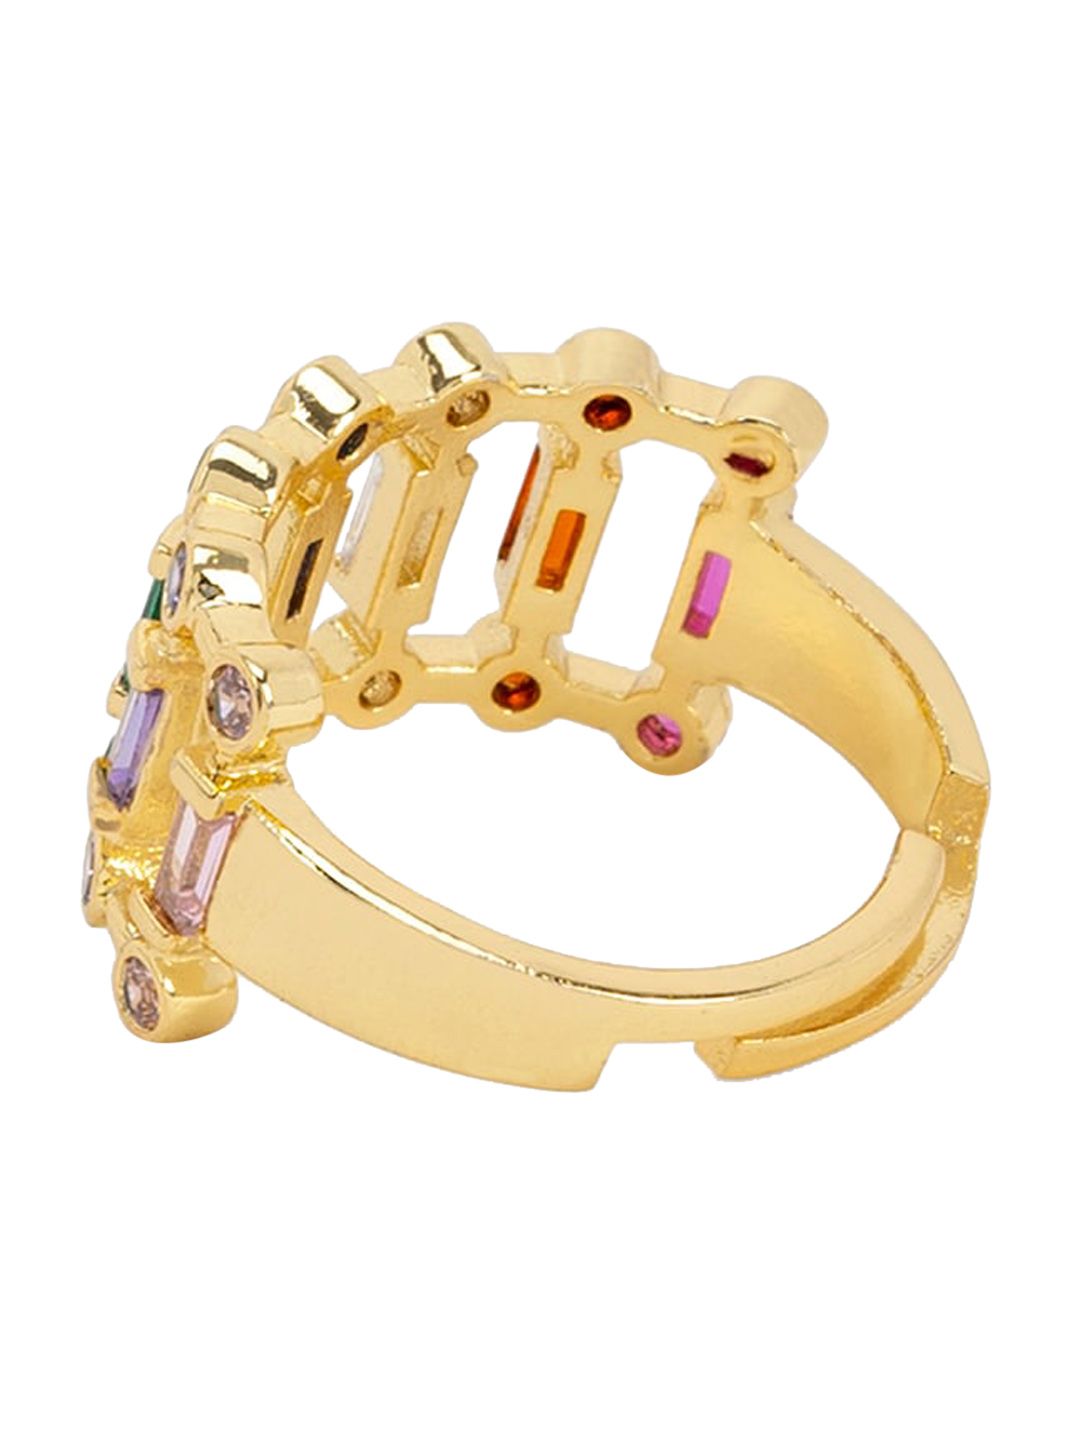 Mikoto by FableStreet Gold -Plated Multi-Colored Studded Finger Ring Price in India